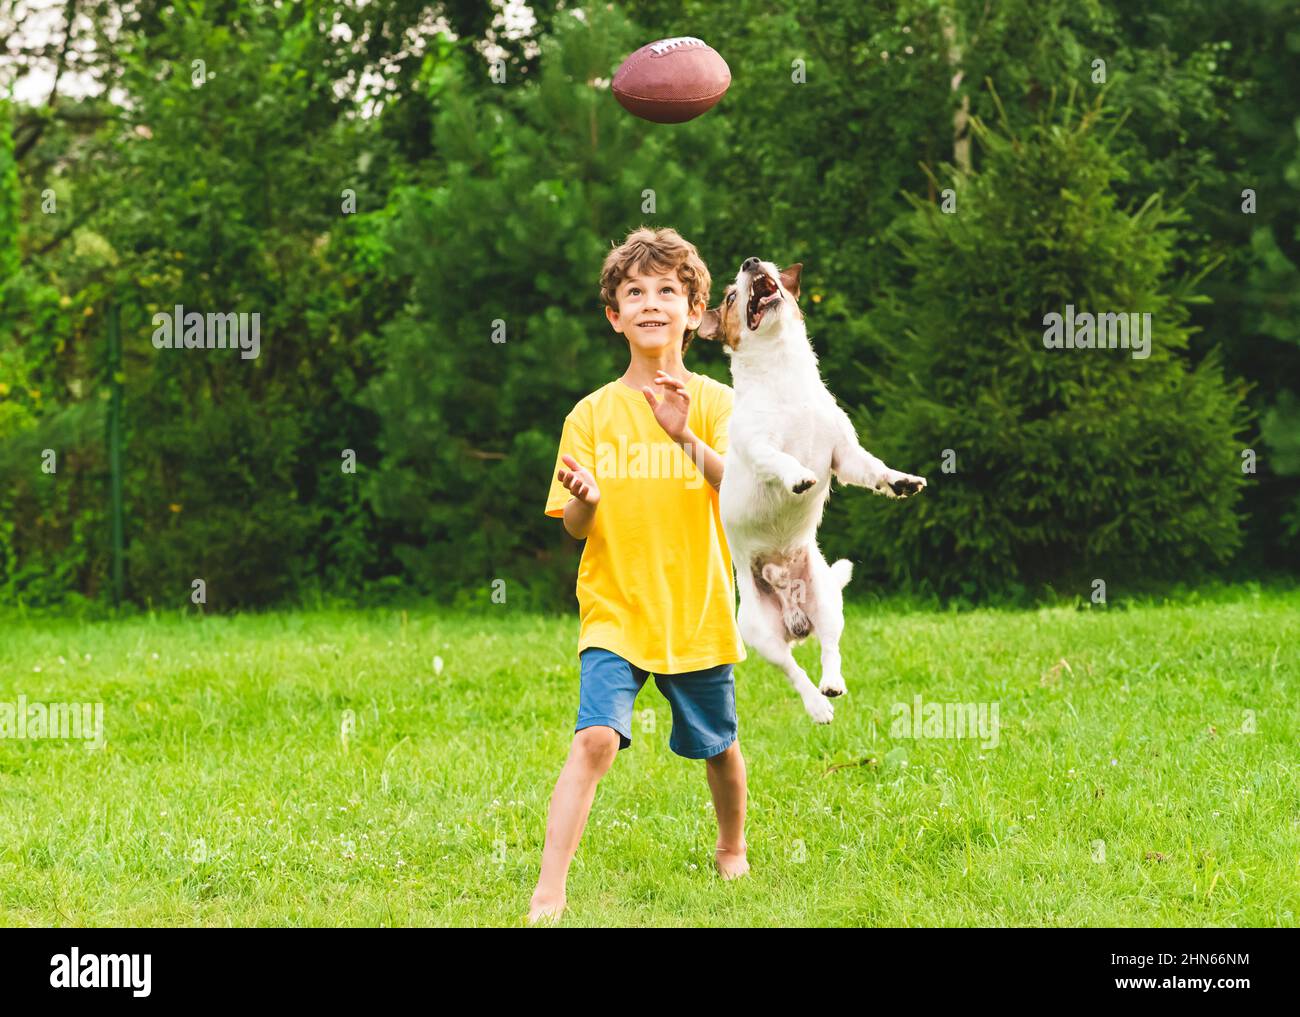 Happy child training to play American football on backyard lawn. Kid and dog catching ball. Stock Photo